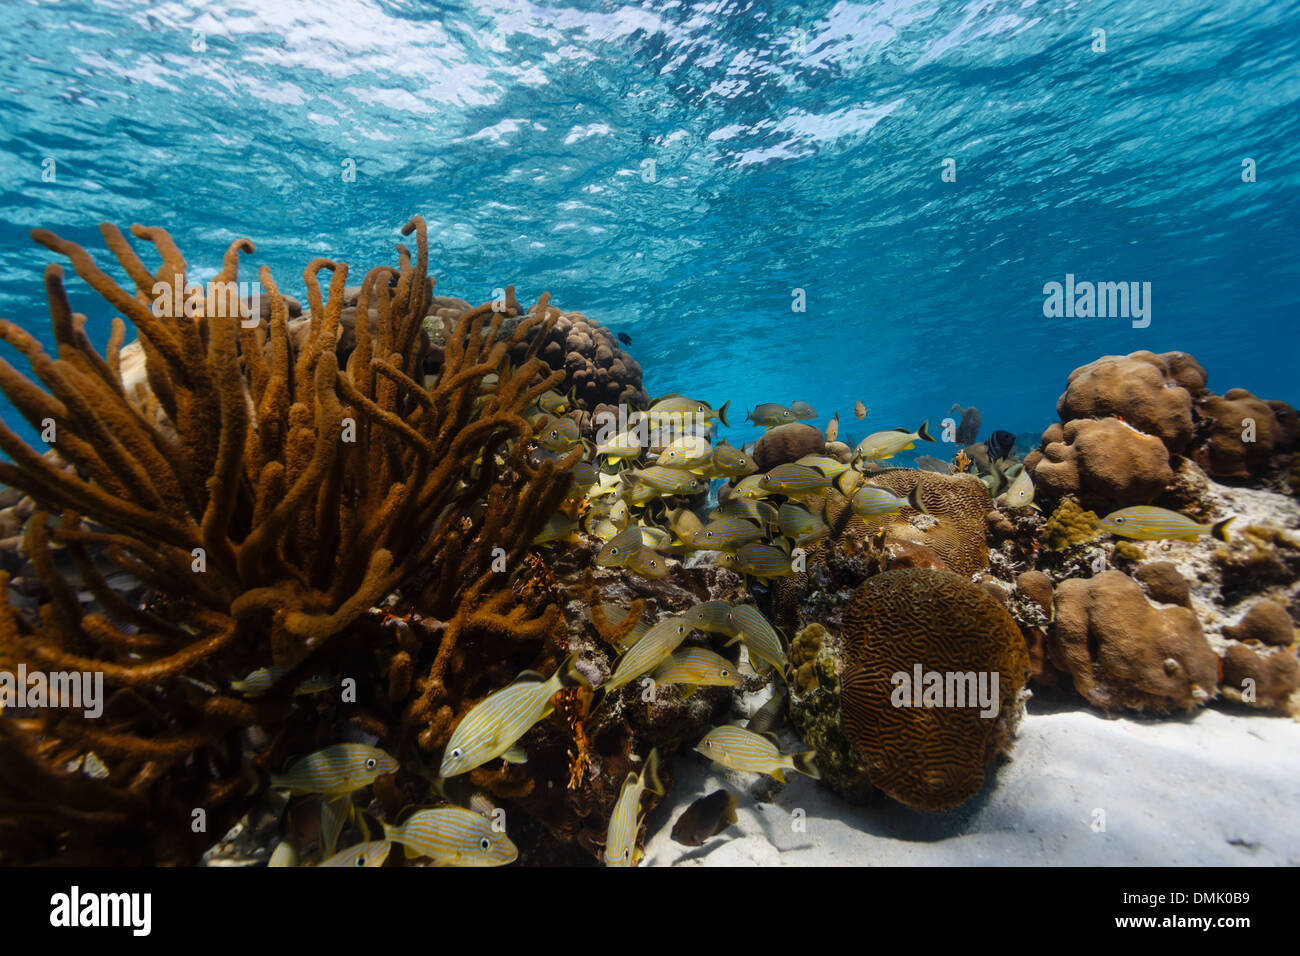 School of tropical fish swim in and out of coral on barrier reef in Belize Stock Photo